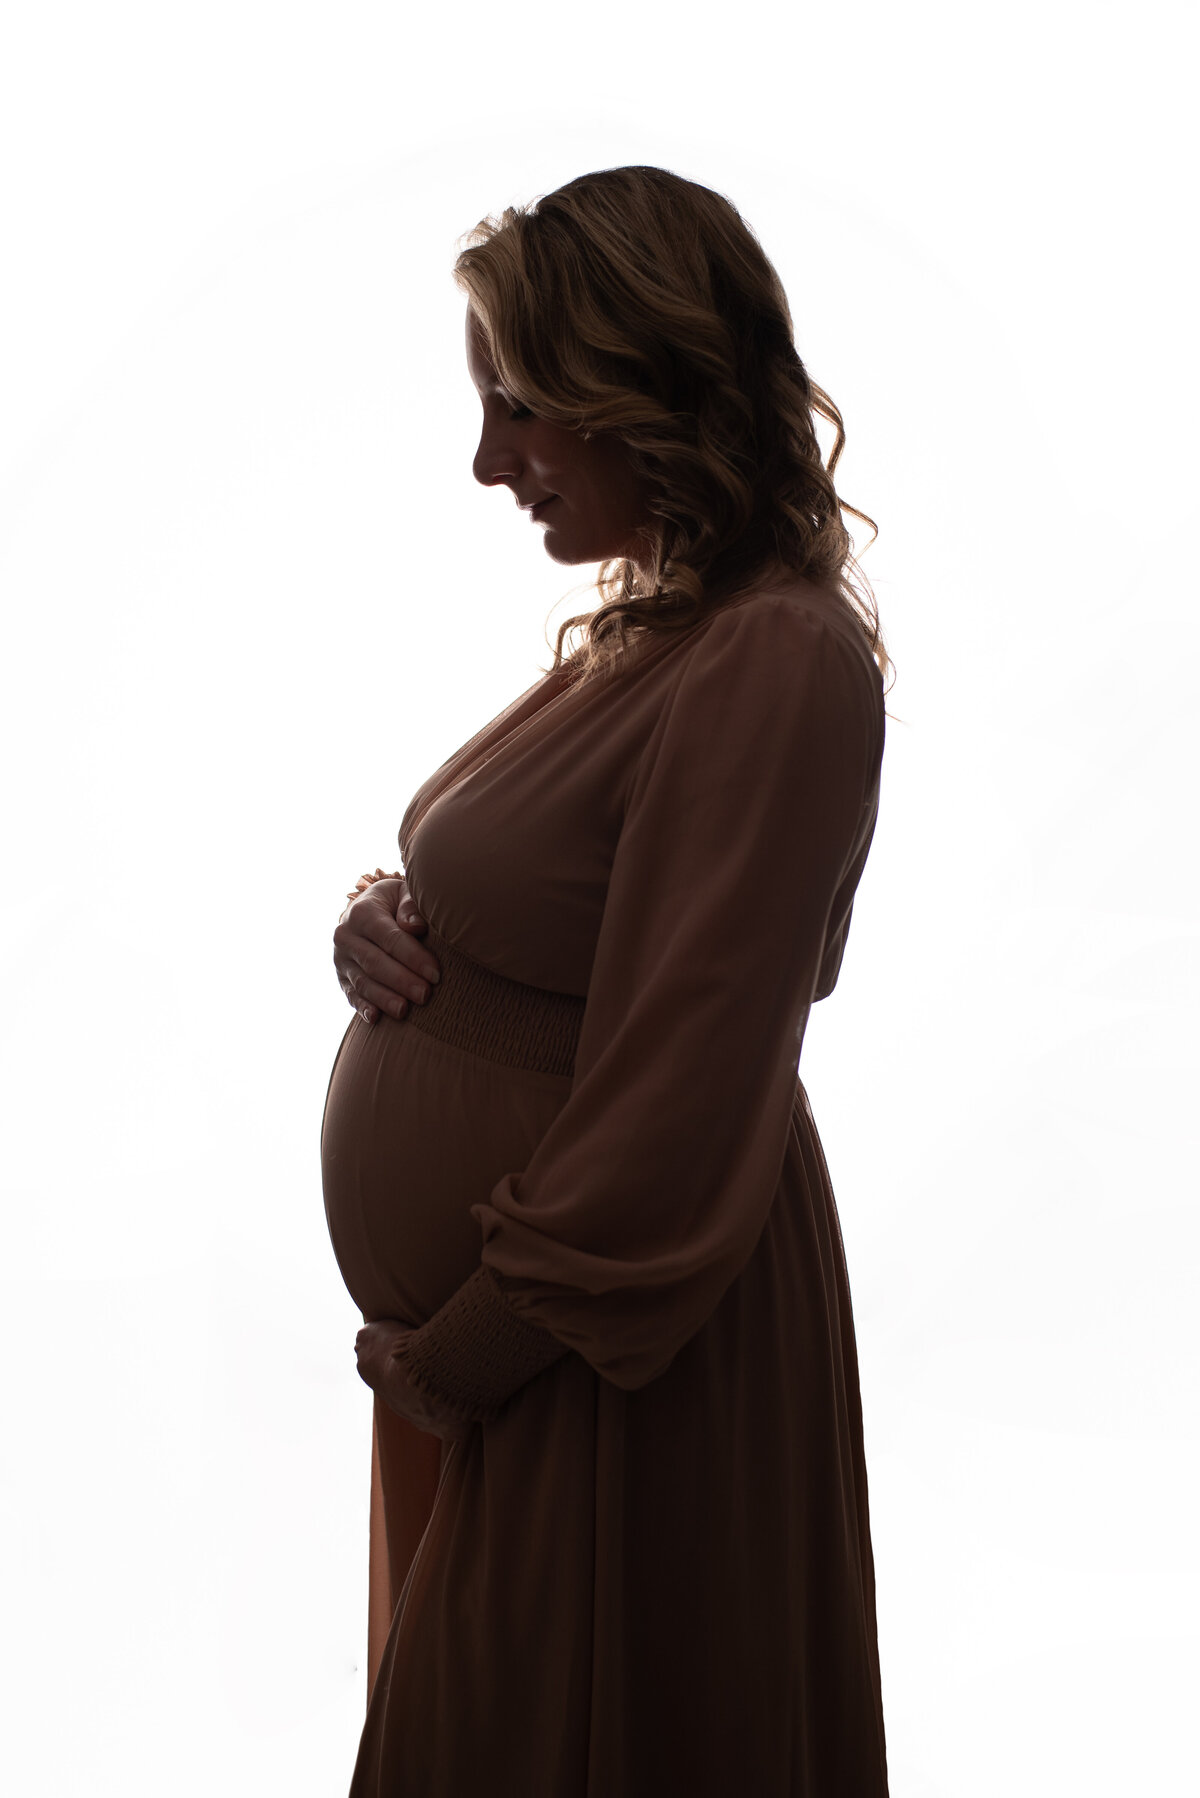 maternity silhouette picture at marietta ga maternity photography studio with pregnant woman standing against white backdrop showing side shot of tummy